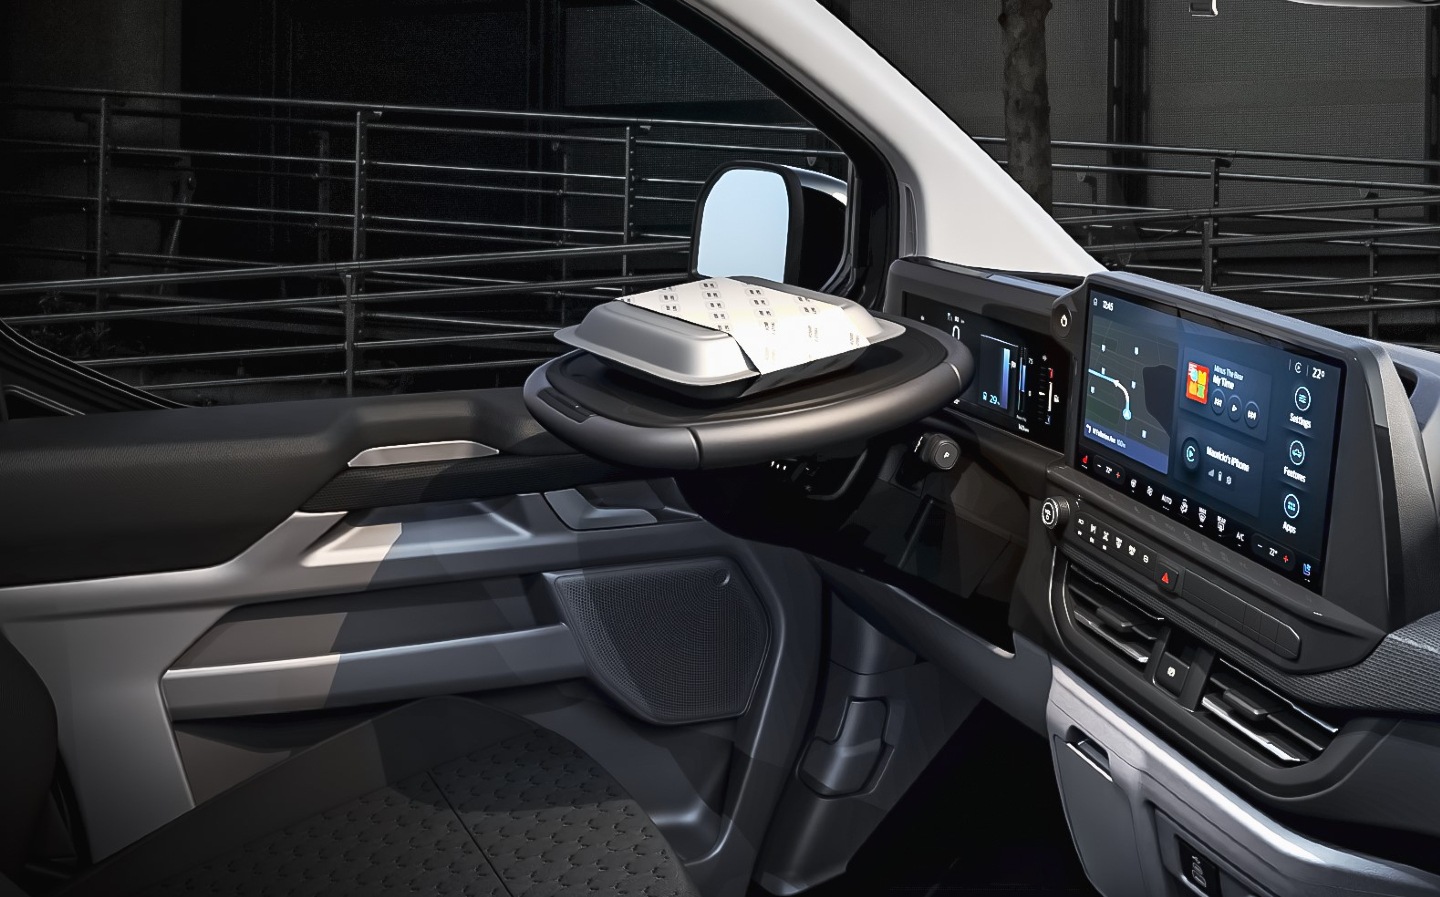 New Transit van has a tilting steering wheel that acts as a meal